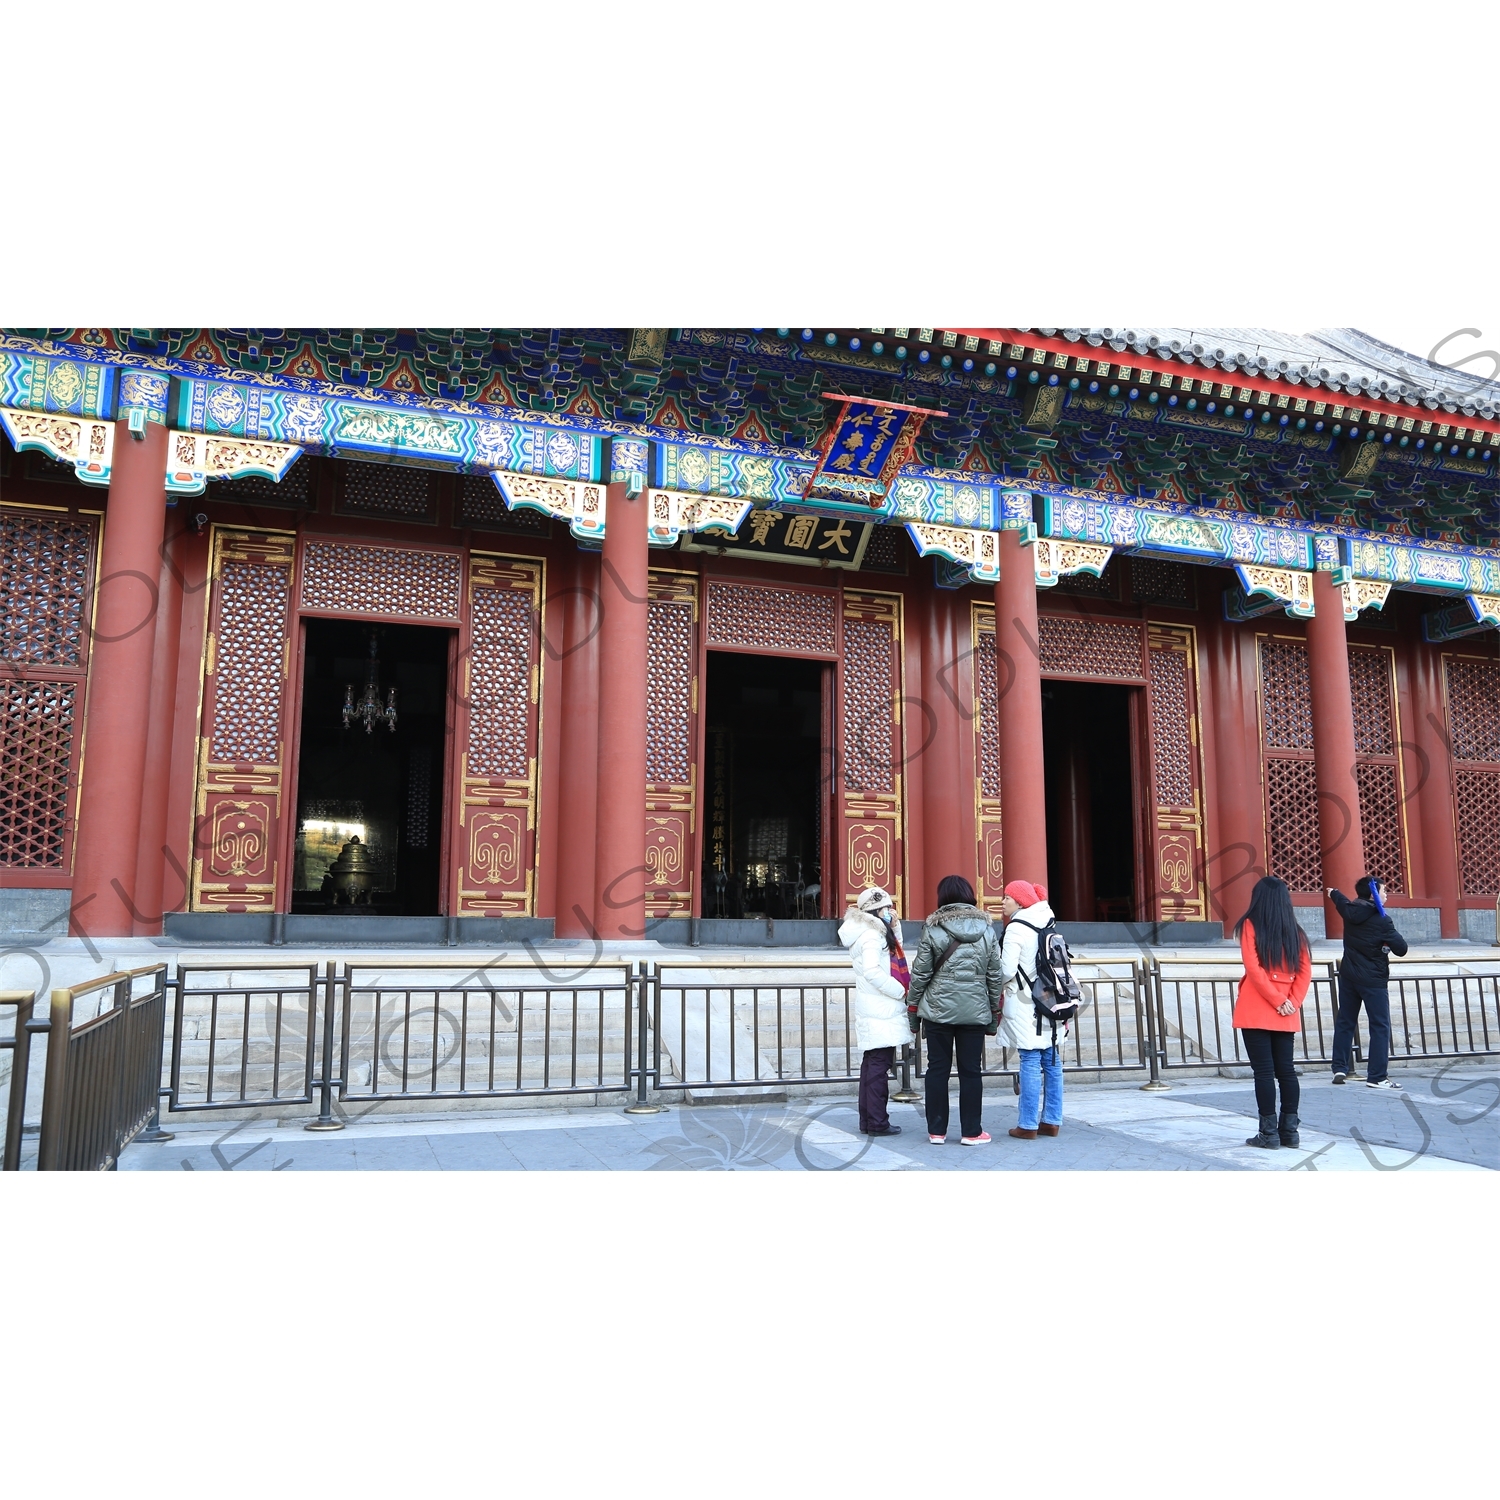 Hall of Benevolence and Longevity (Renshoudian) in the Summer Palace in Beijing